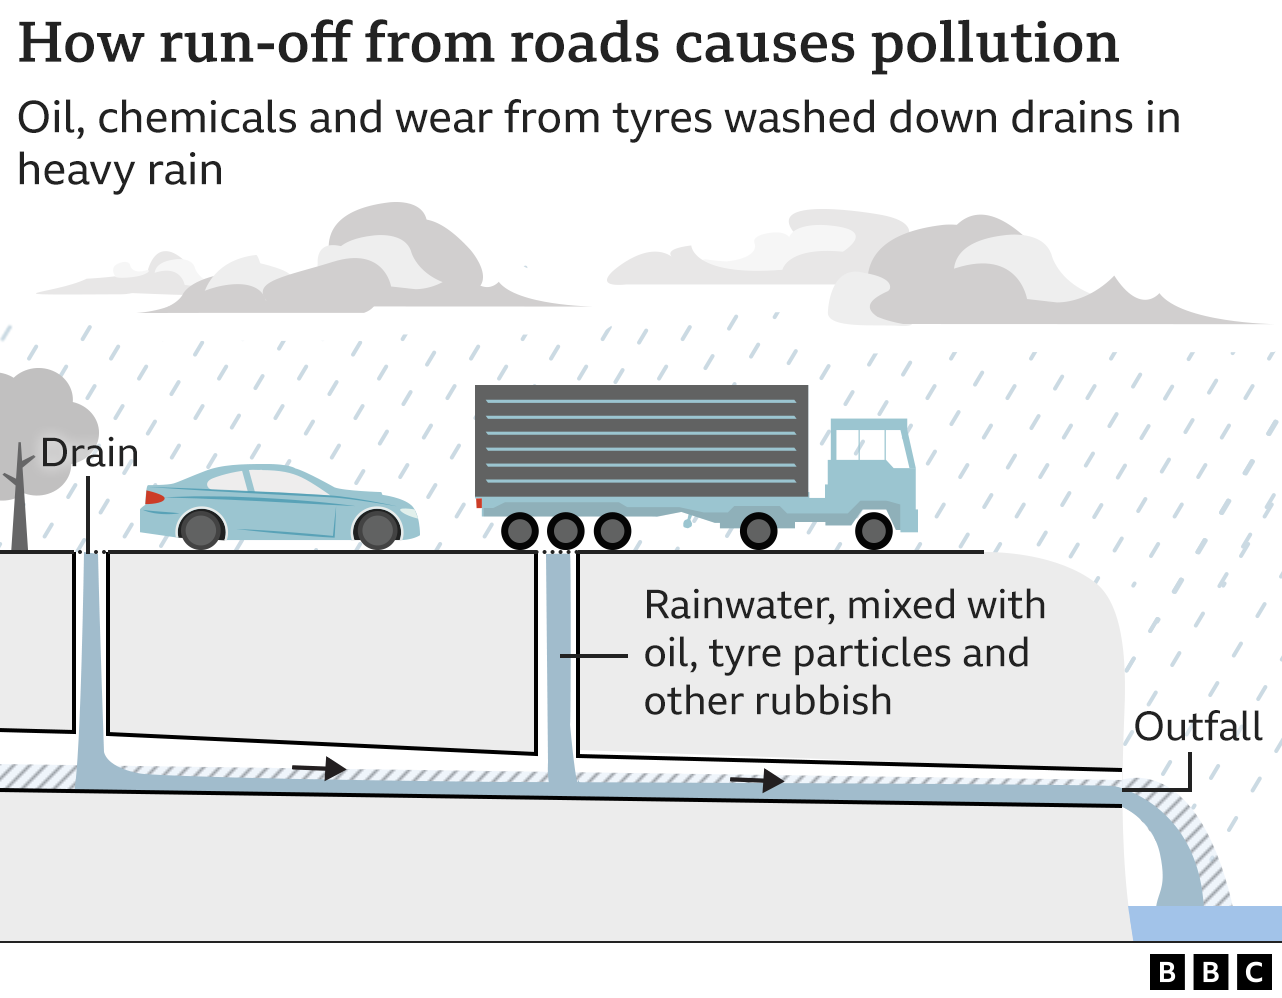 Graphic showing how oil, chemicals and wear from tyres can be washed down drains in heavy rain